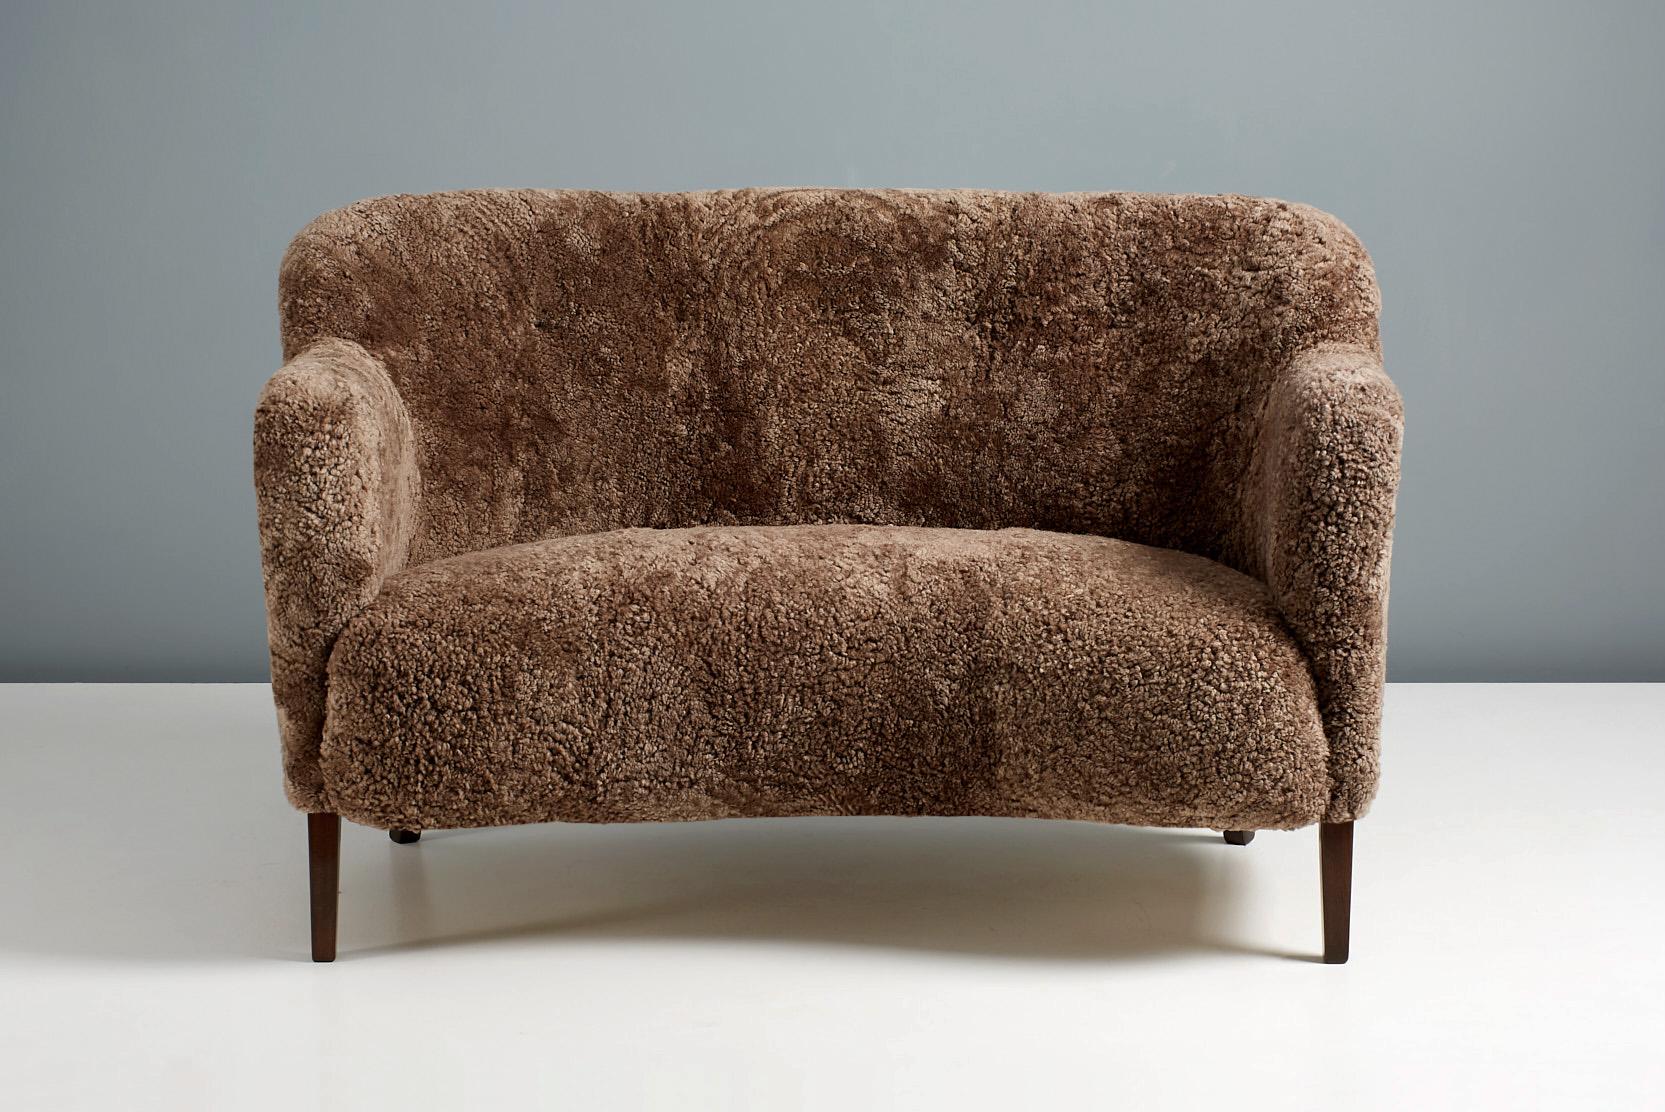 A custom-made new edition of this classic love-seat sofa by Danish designer and cabinetmaker: Alfred Kristensen. This re-edition is produced under license in Sweden by Dagmar and available to order in a range of upholstery and wood finishes.